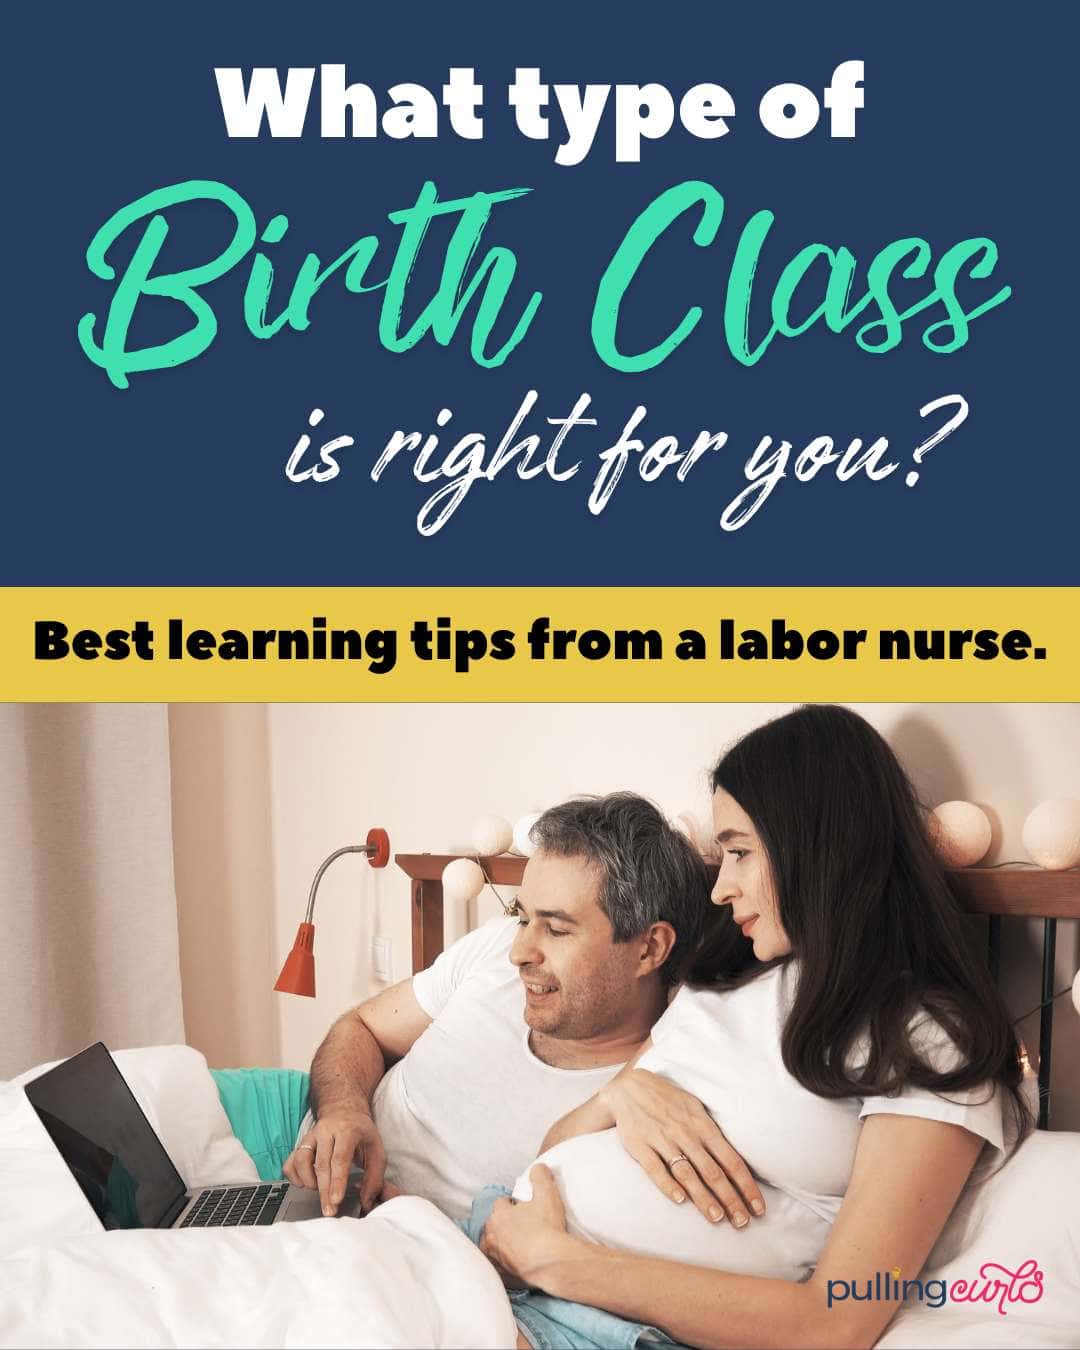 Explore the pros and cons of online and in-person birth classes! Delve into the differences between these formats, considering factors like convenience, interaction, and accessibility to expert guidance. Whether you opt for the flexibility of online classes or the hands-on experience of in-person sessions, empower yourself with the knowledge and support you need. birth classes, online vs. in-person, childbirth education, pros and cons, convenience, interaction, accessibility, expert guidance. via @pullingcurls